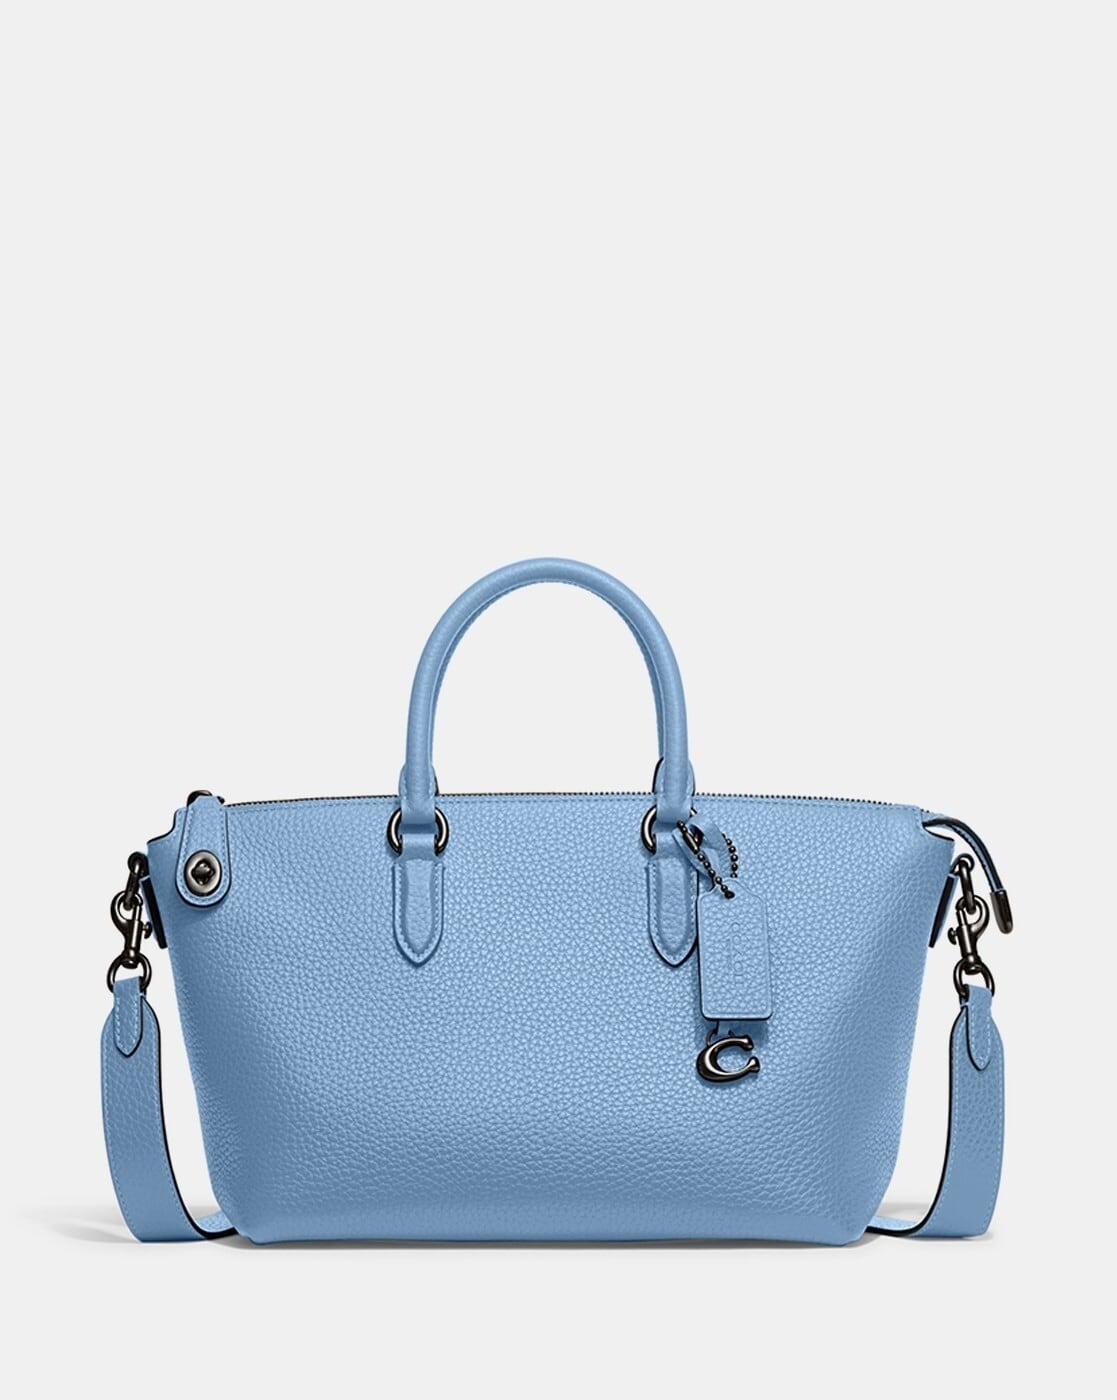 10 best Coach bags to buy that are worth every penny